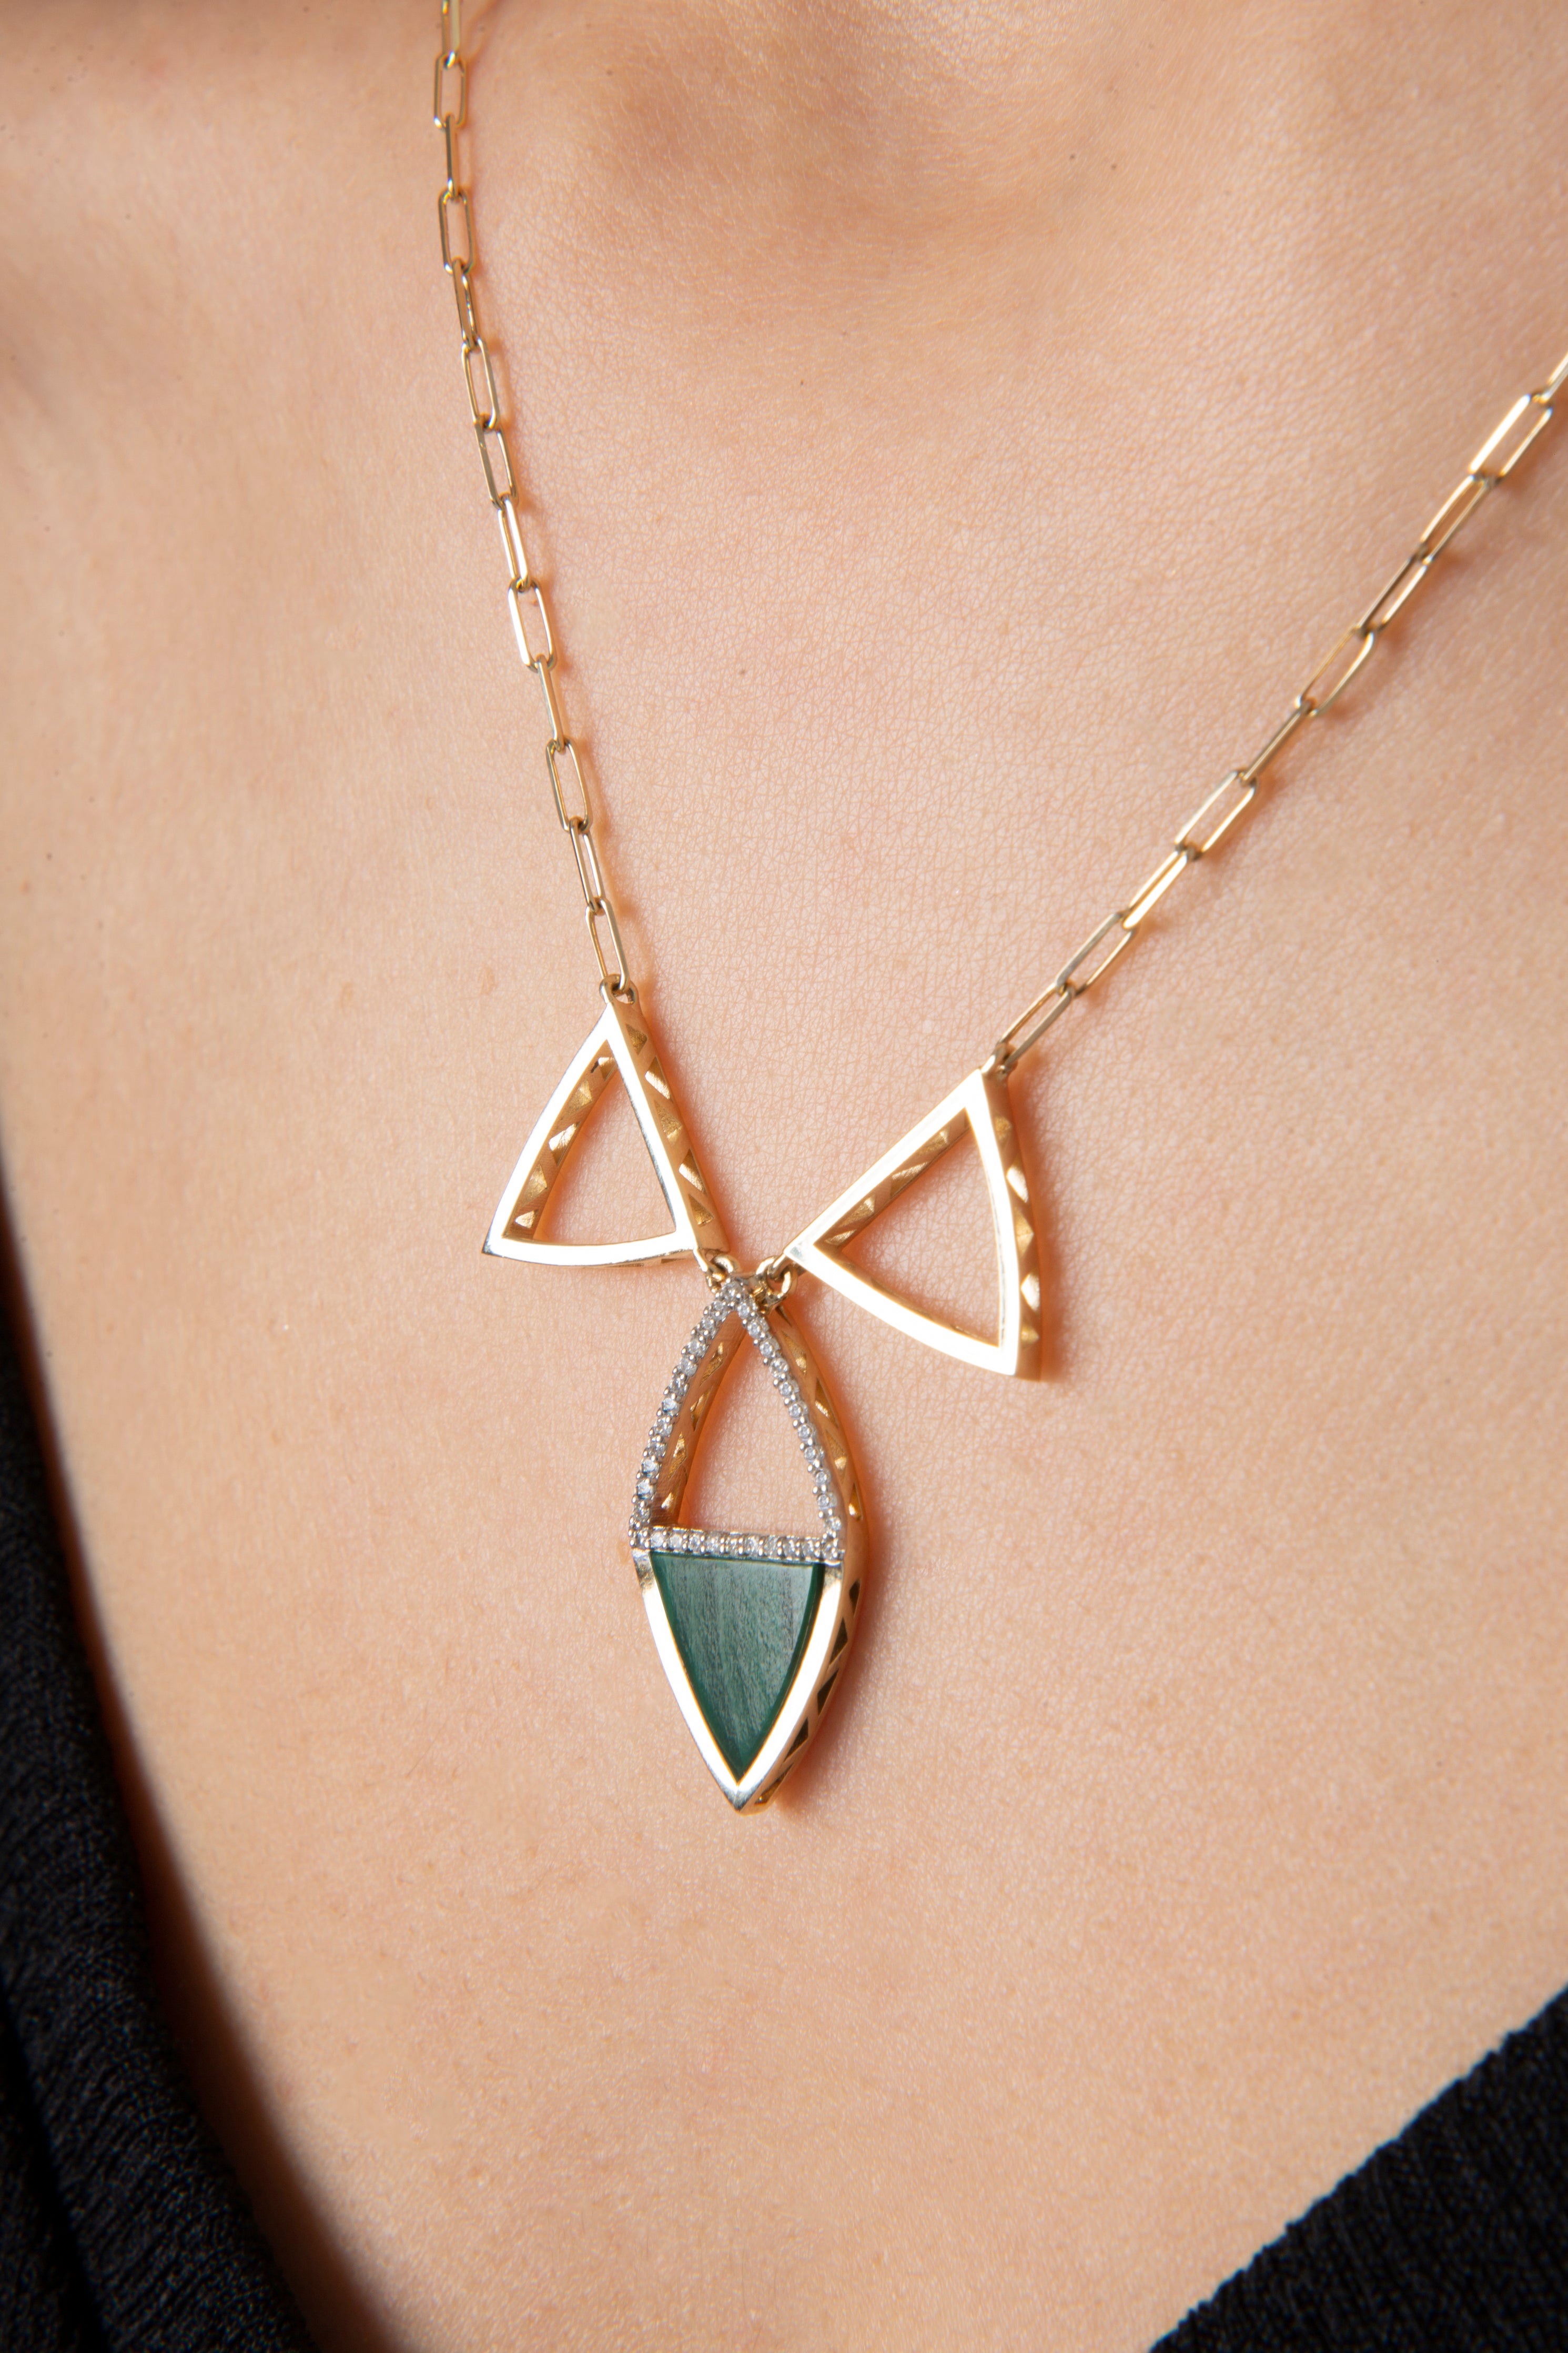 Feminine Glory Mini Green Necklace in Yellow Gold - Her Story Shop